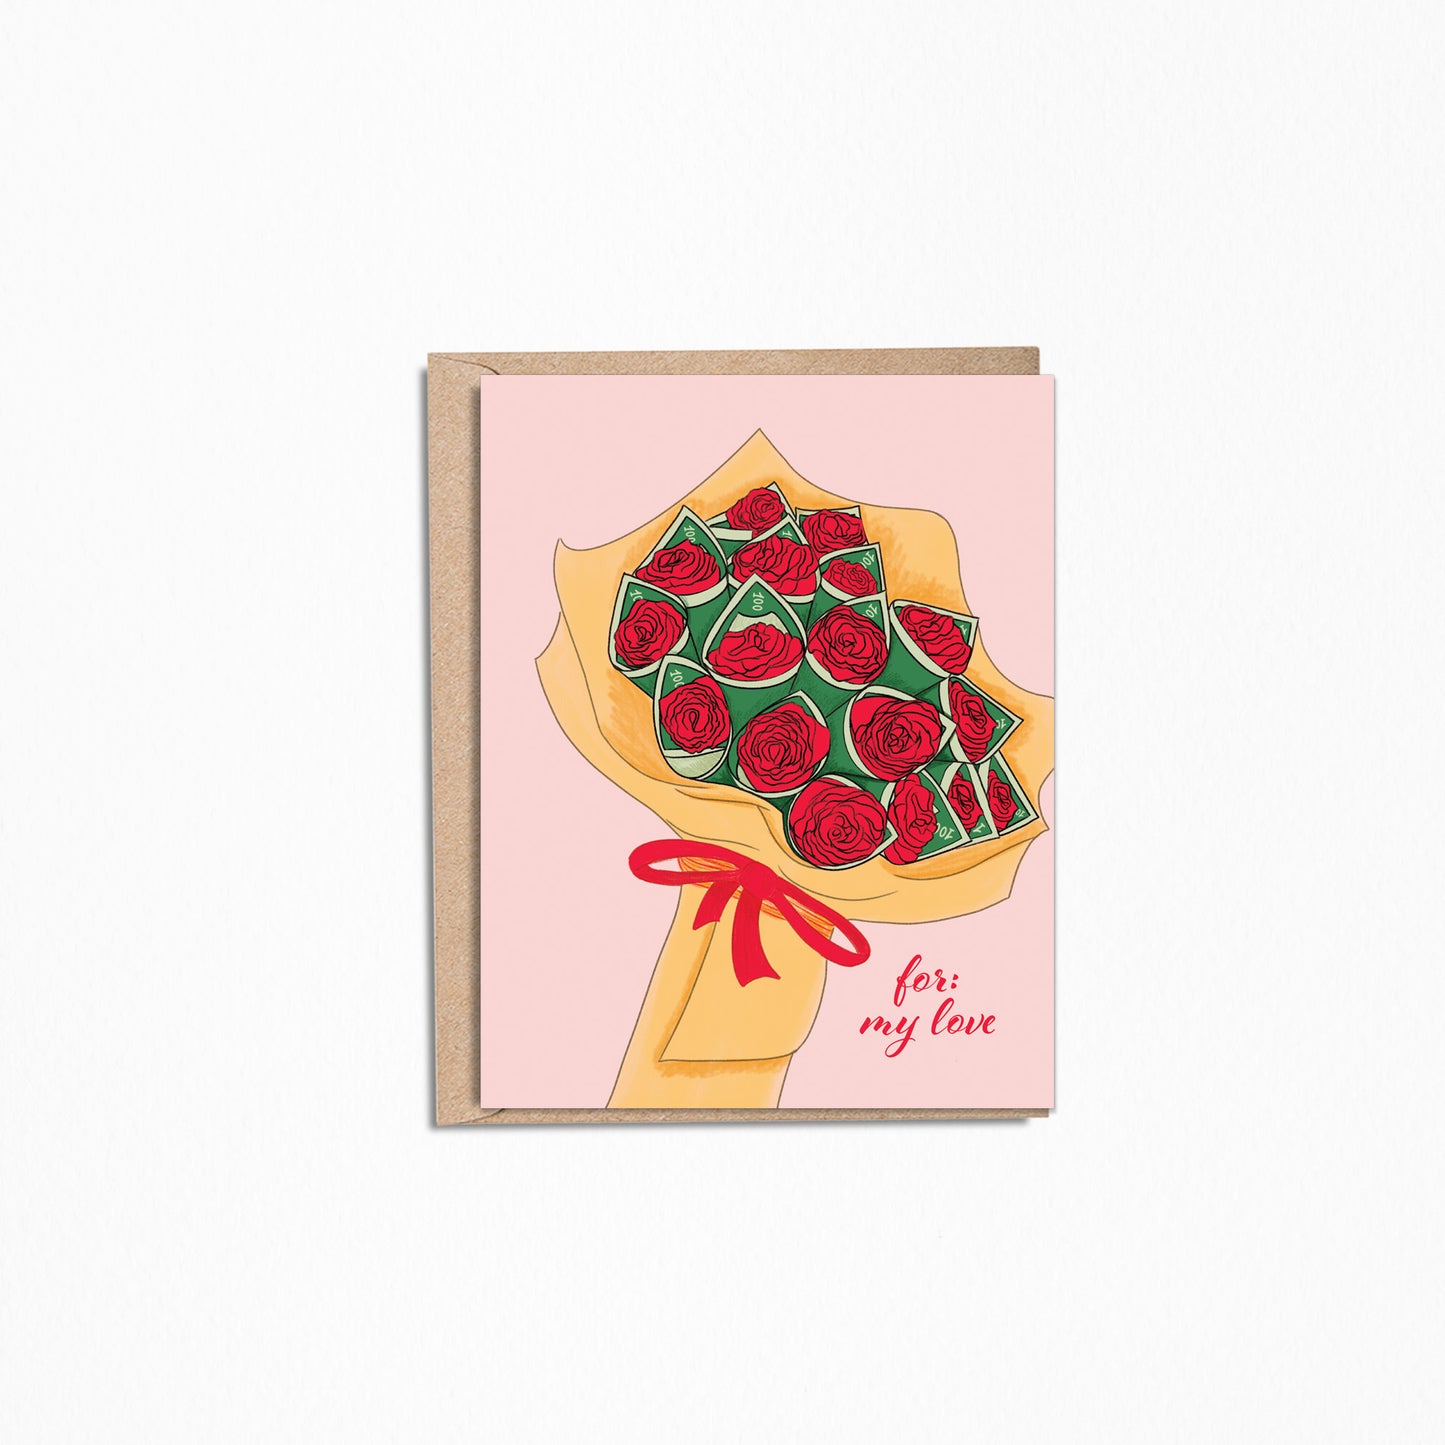 Love Cards, Assorted Box of 8